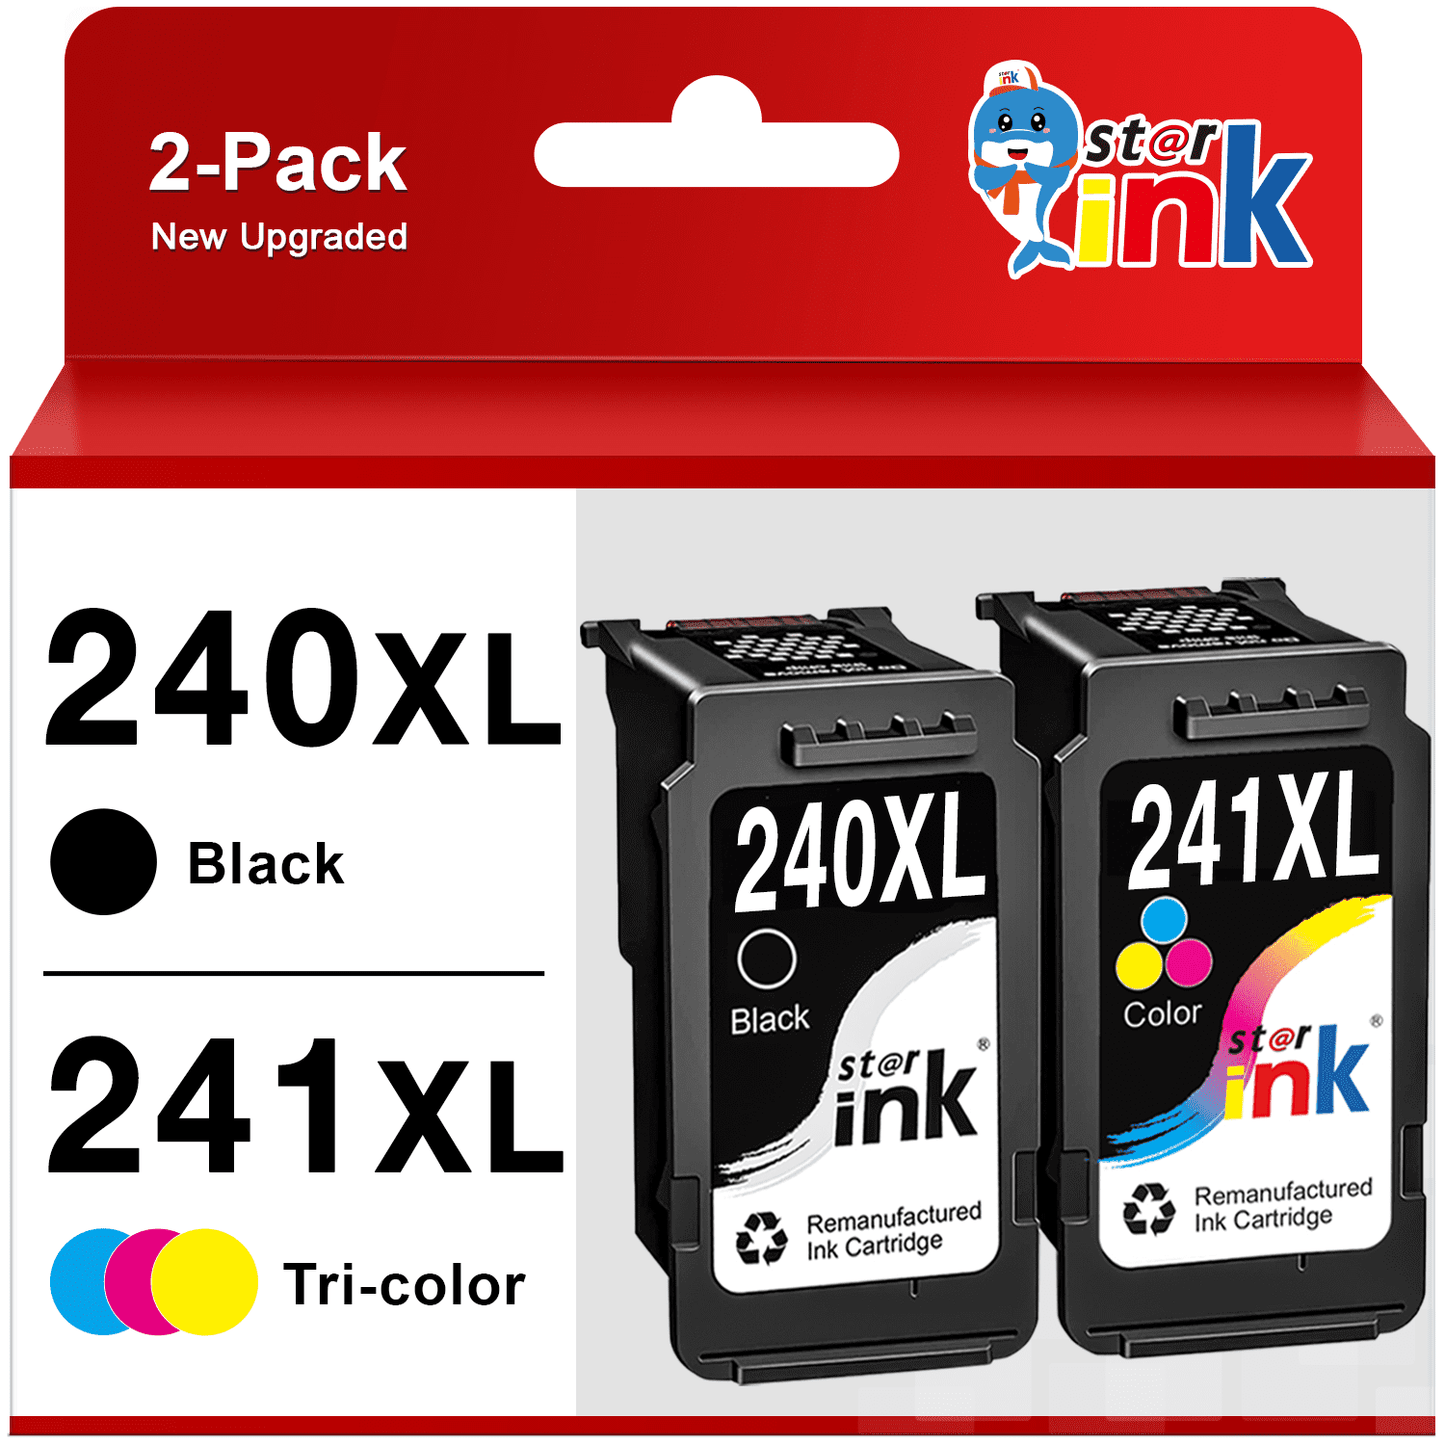 240XL Ink Cartridgess for Canon 240XL and 241XL for Canon Ink 240 and 241 for Pixma MG3620 MG3220 MG2220 TS5120 MX472 MX452 Printer (Black, Tri-color)